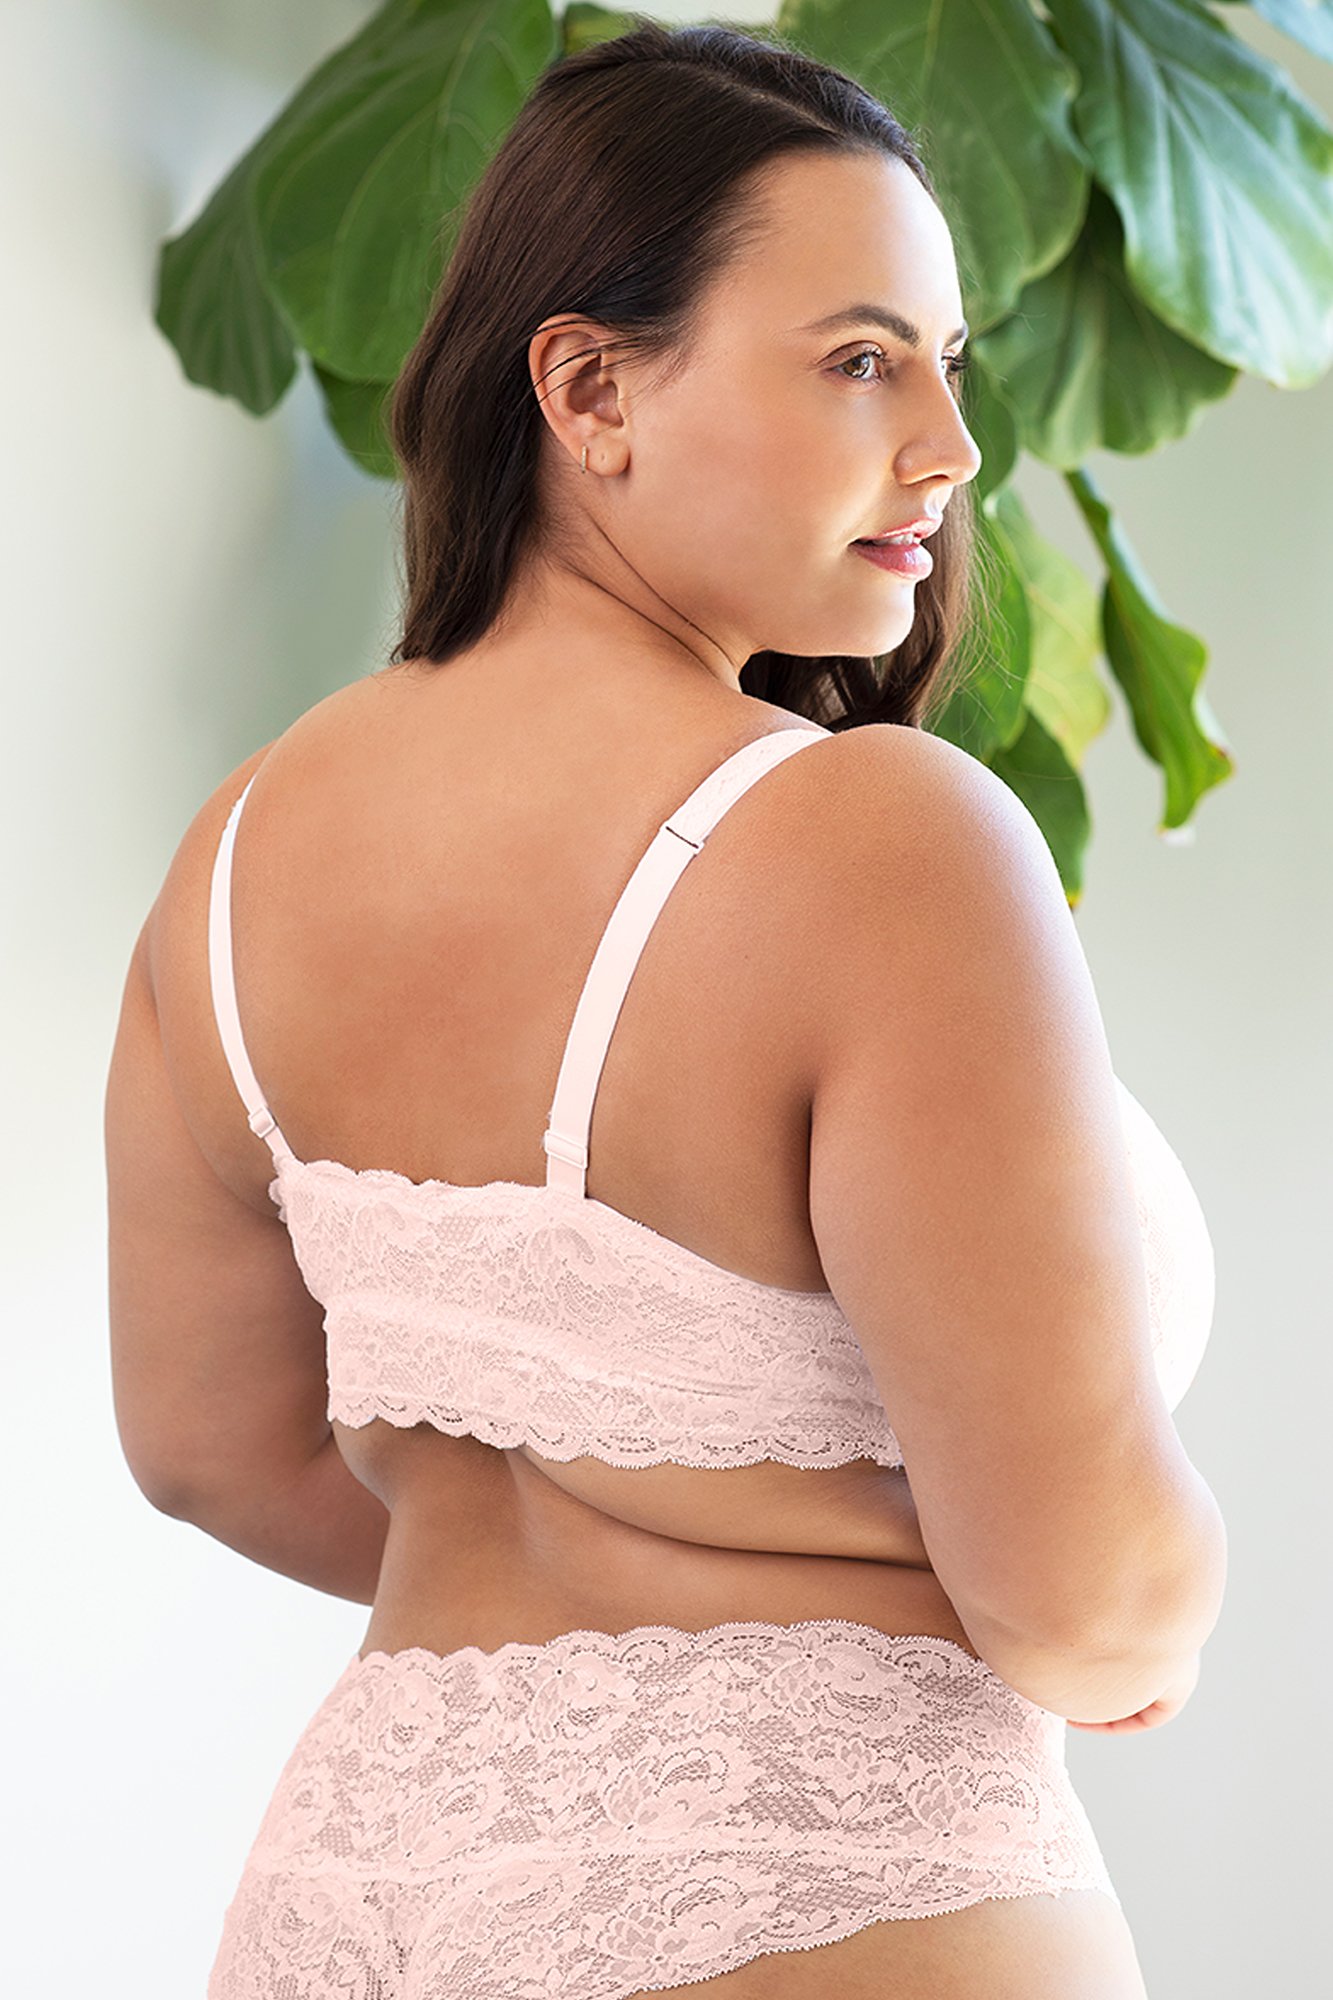 Forte Triangle Curvy Bralette - FORTE1362 – The Full Cup